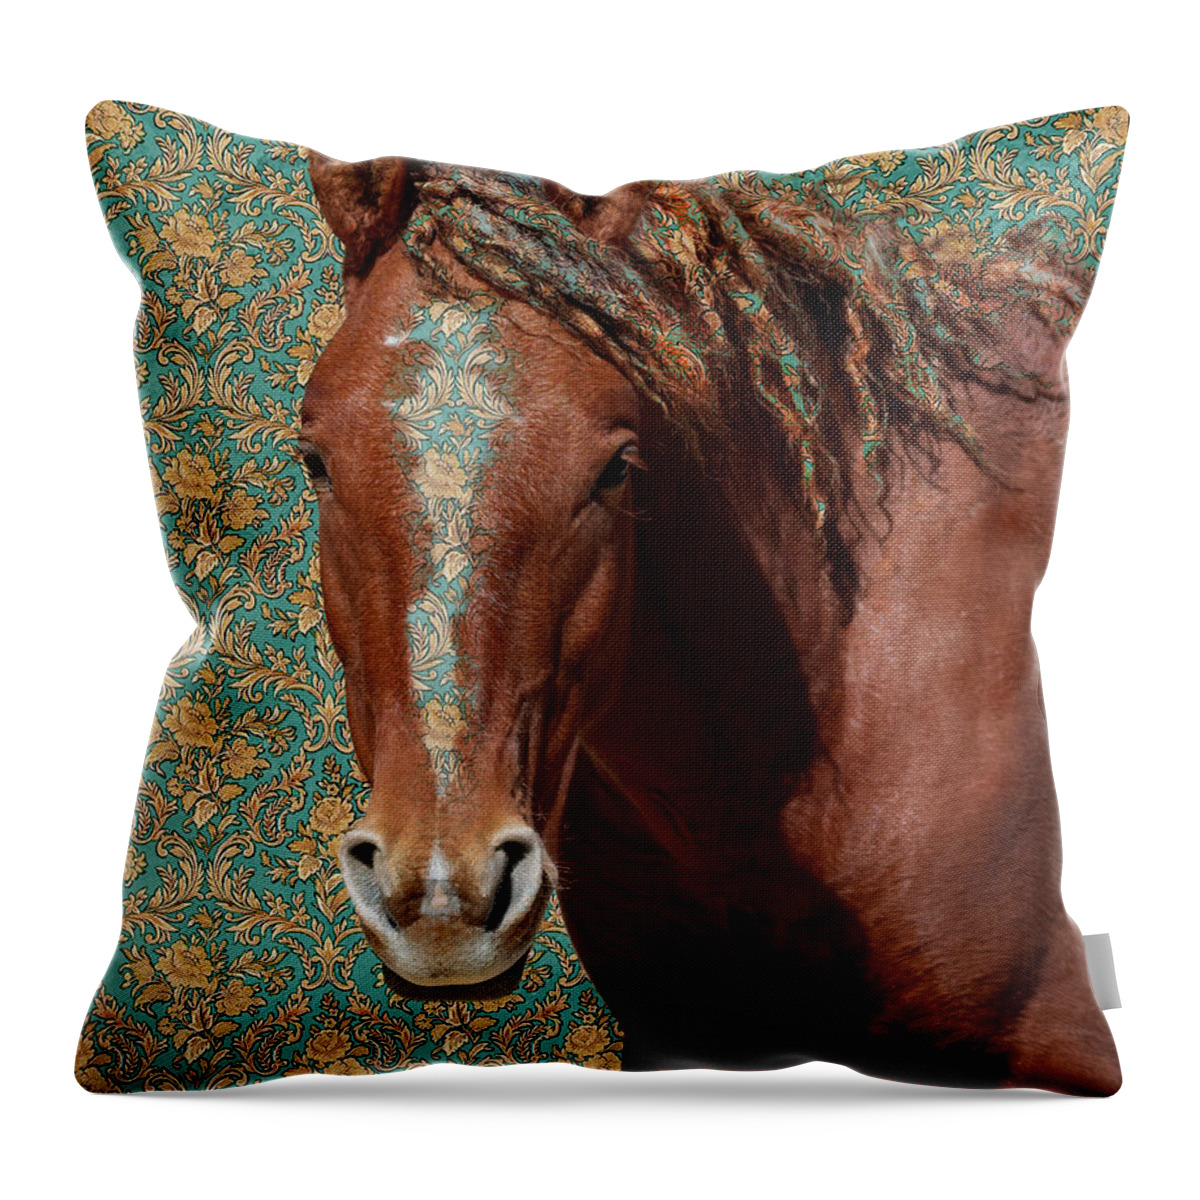 Wild Horses Throw Pillow featuring the photograph Curly by Mary Hone